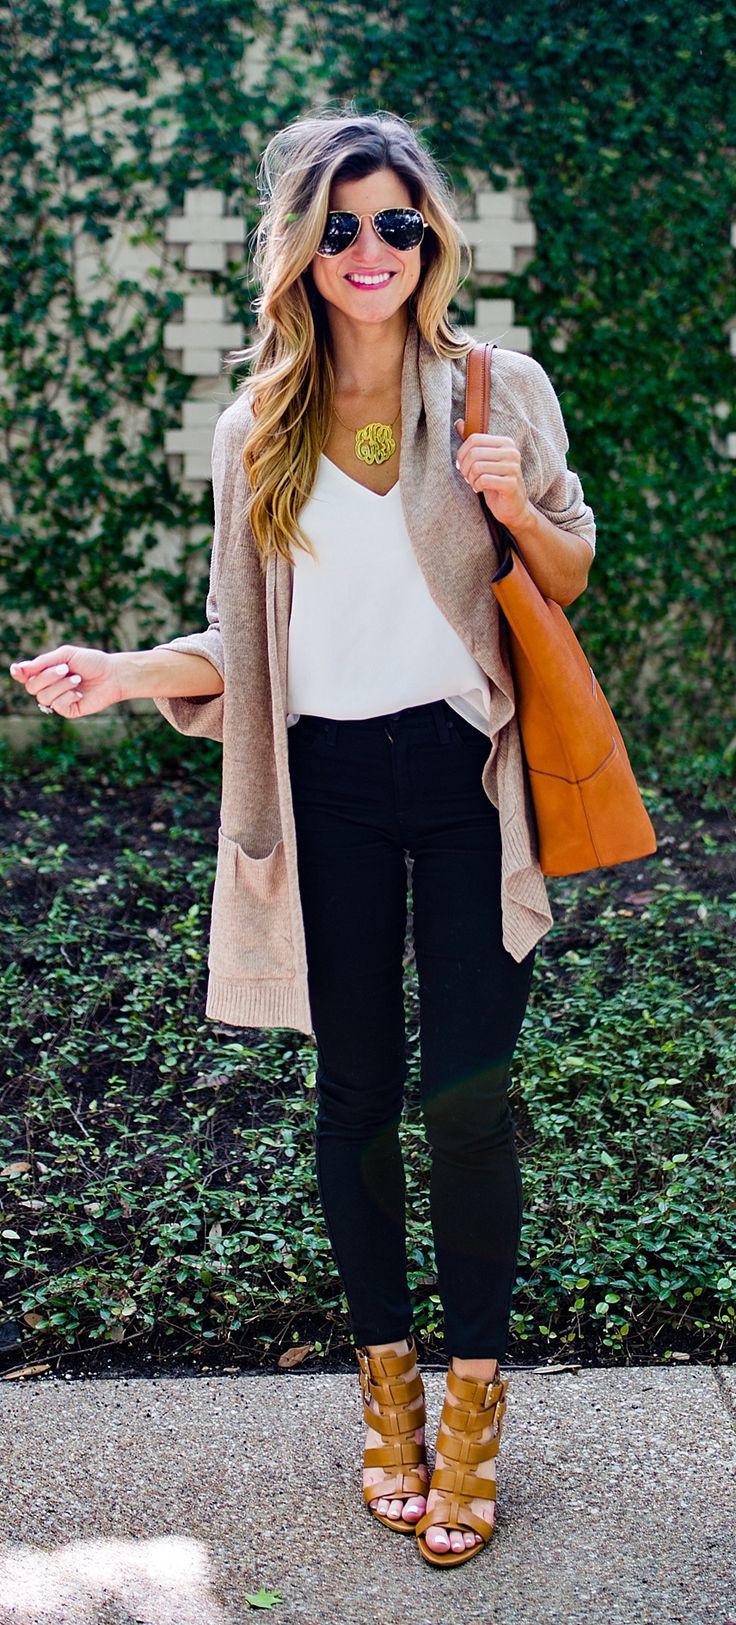 Black jeans spring outfit on Stylevore